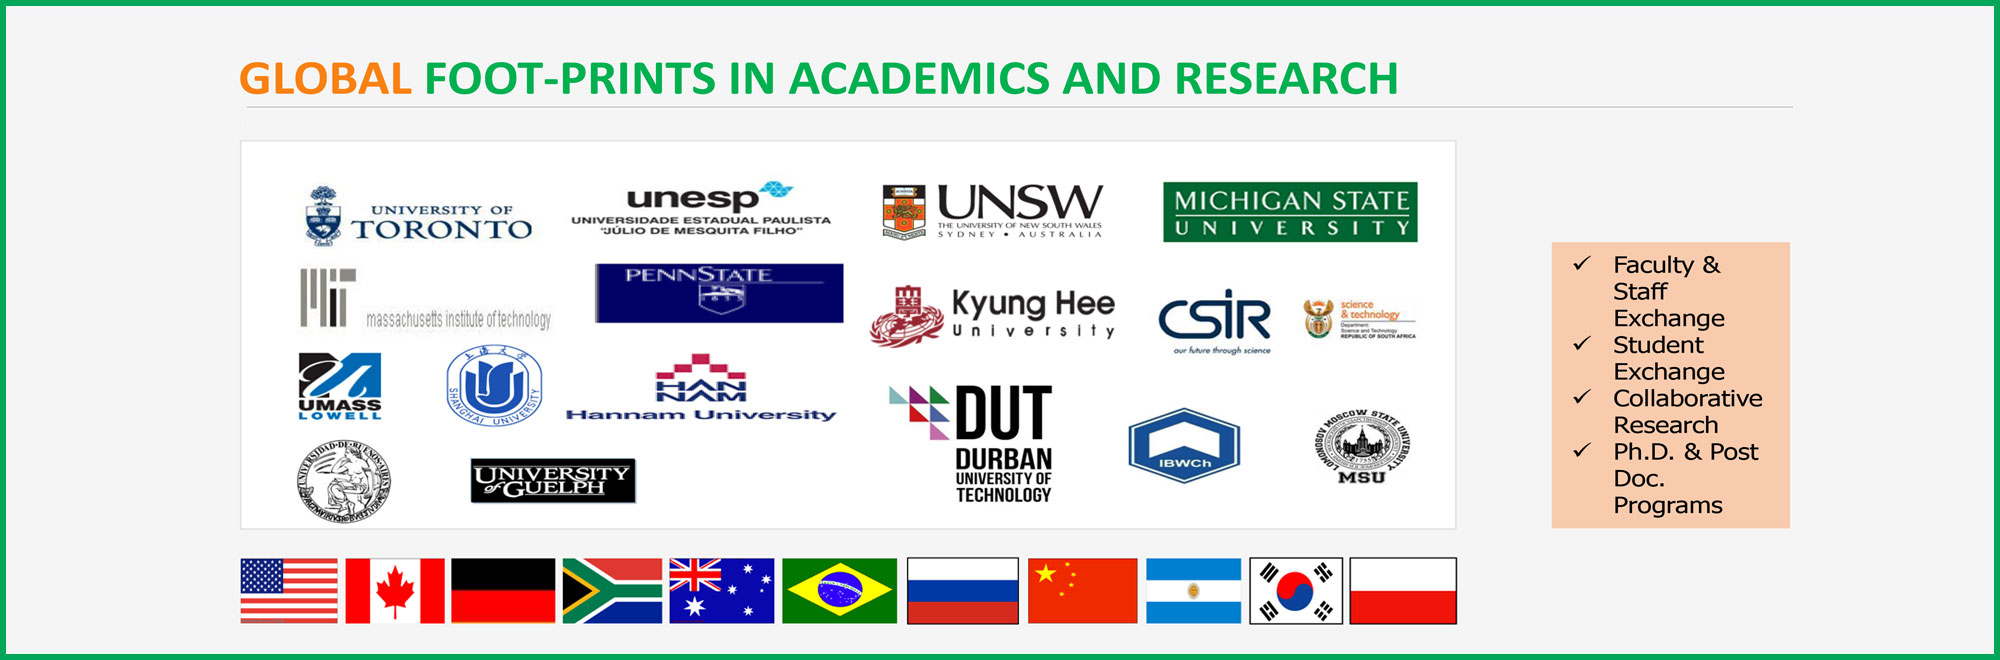 GLOBAL FOOT-PRINTS IN ACADEMICS AND RESEARCH